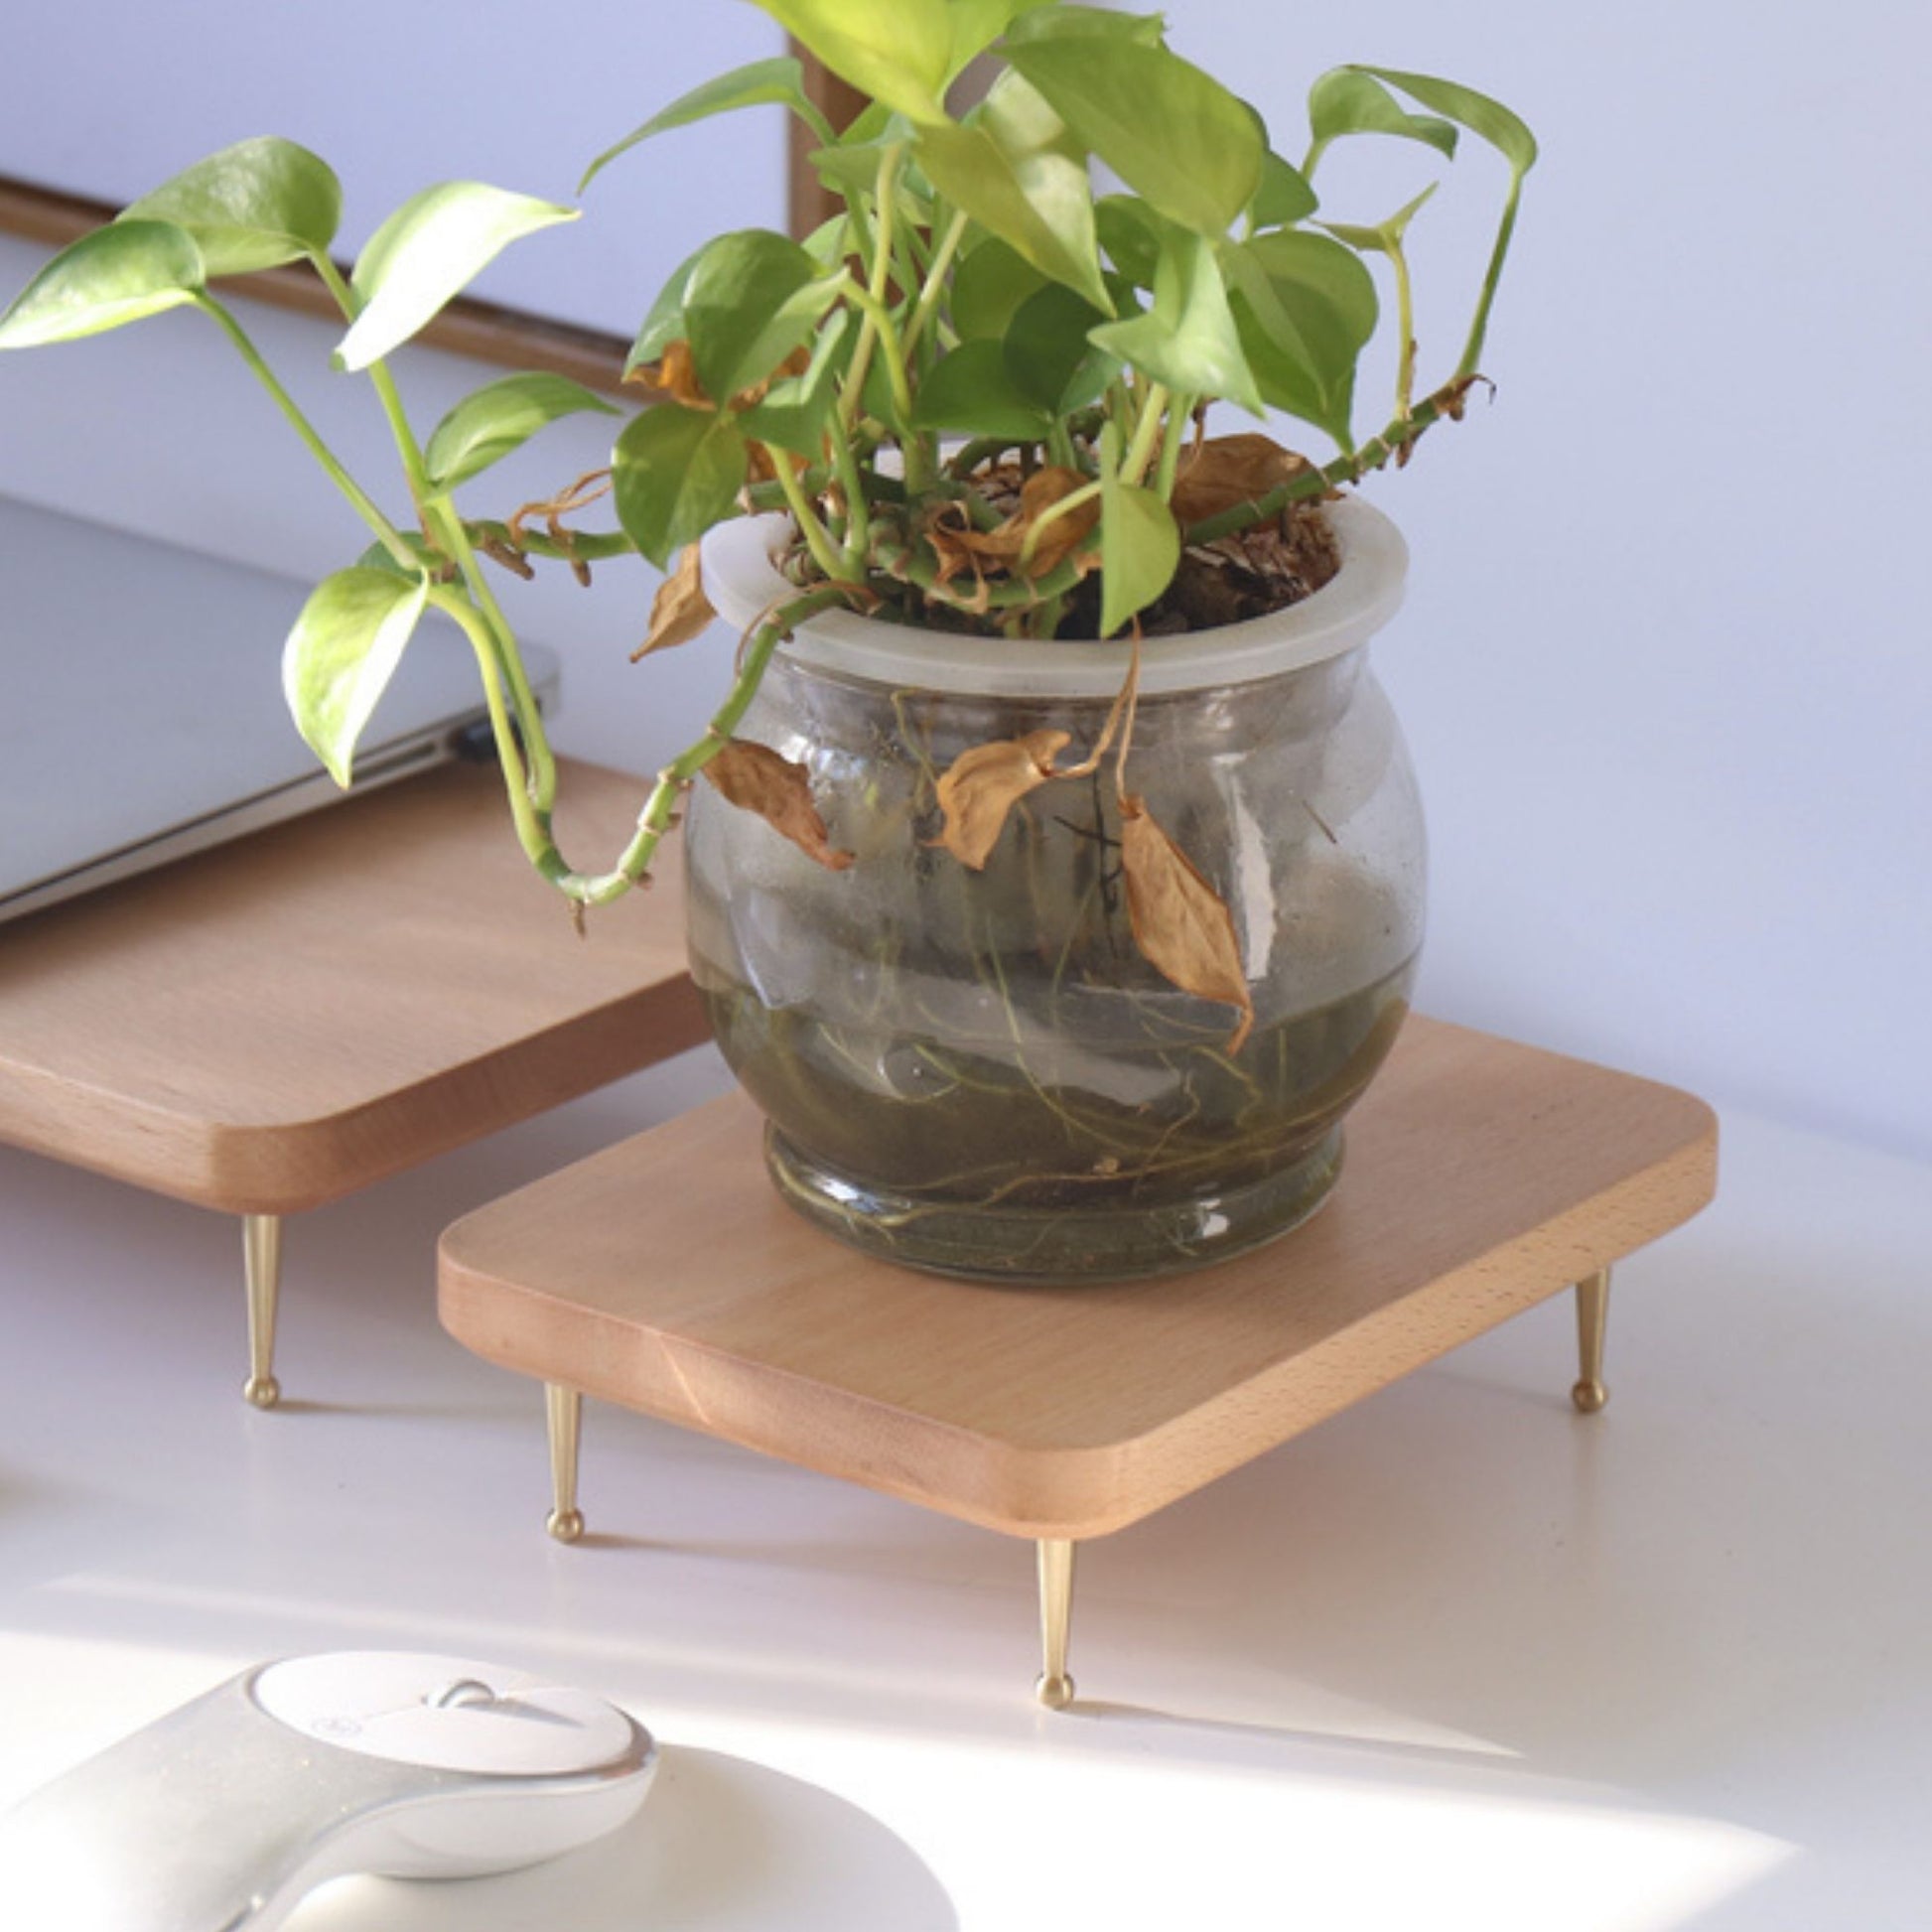 Beech Wood Monitor Holder with USB